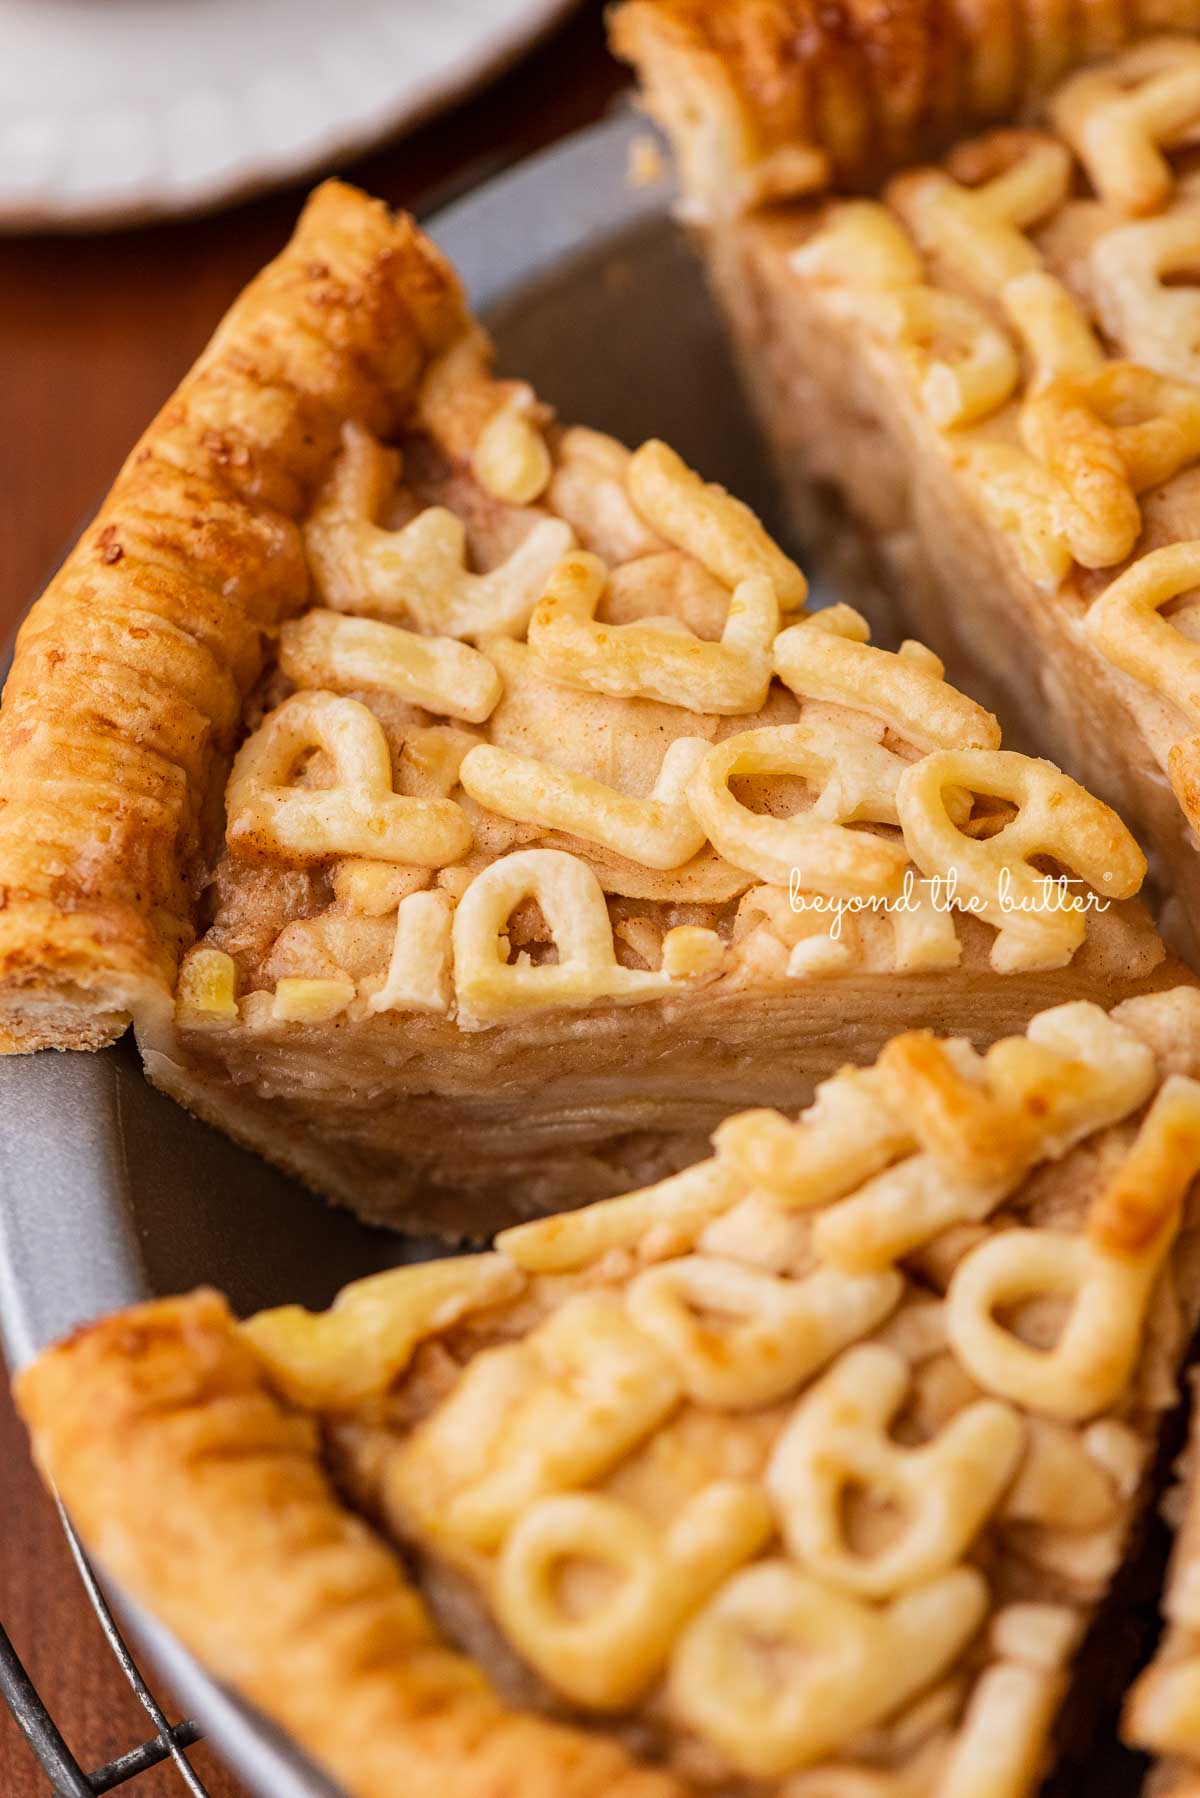 Easy homemade apple pie with slices removed | © Beyond the Butter®